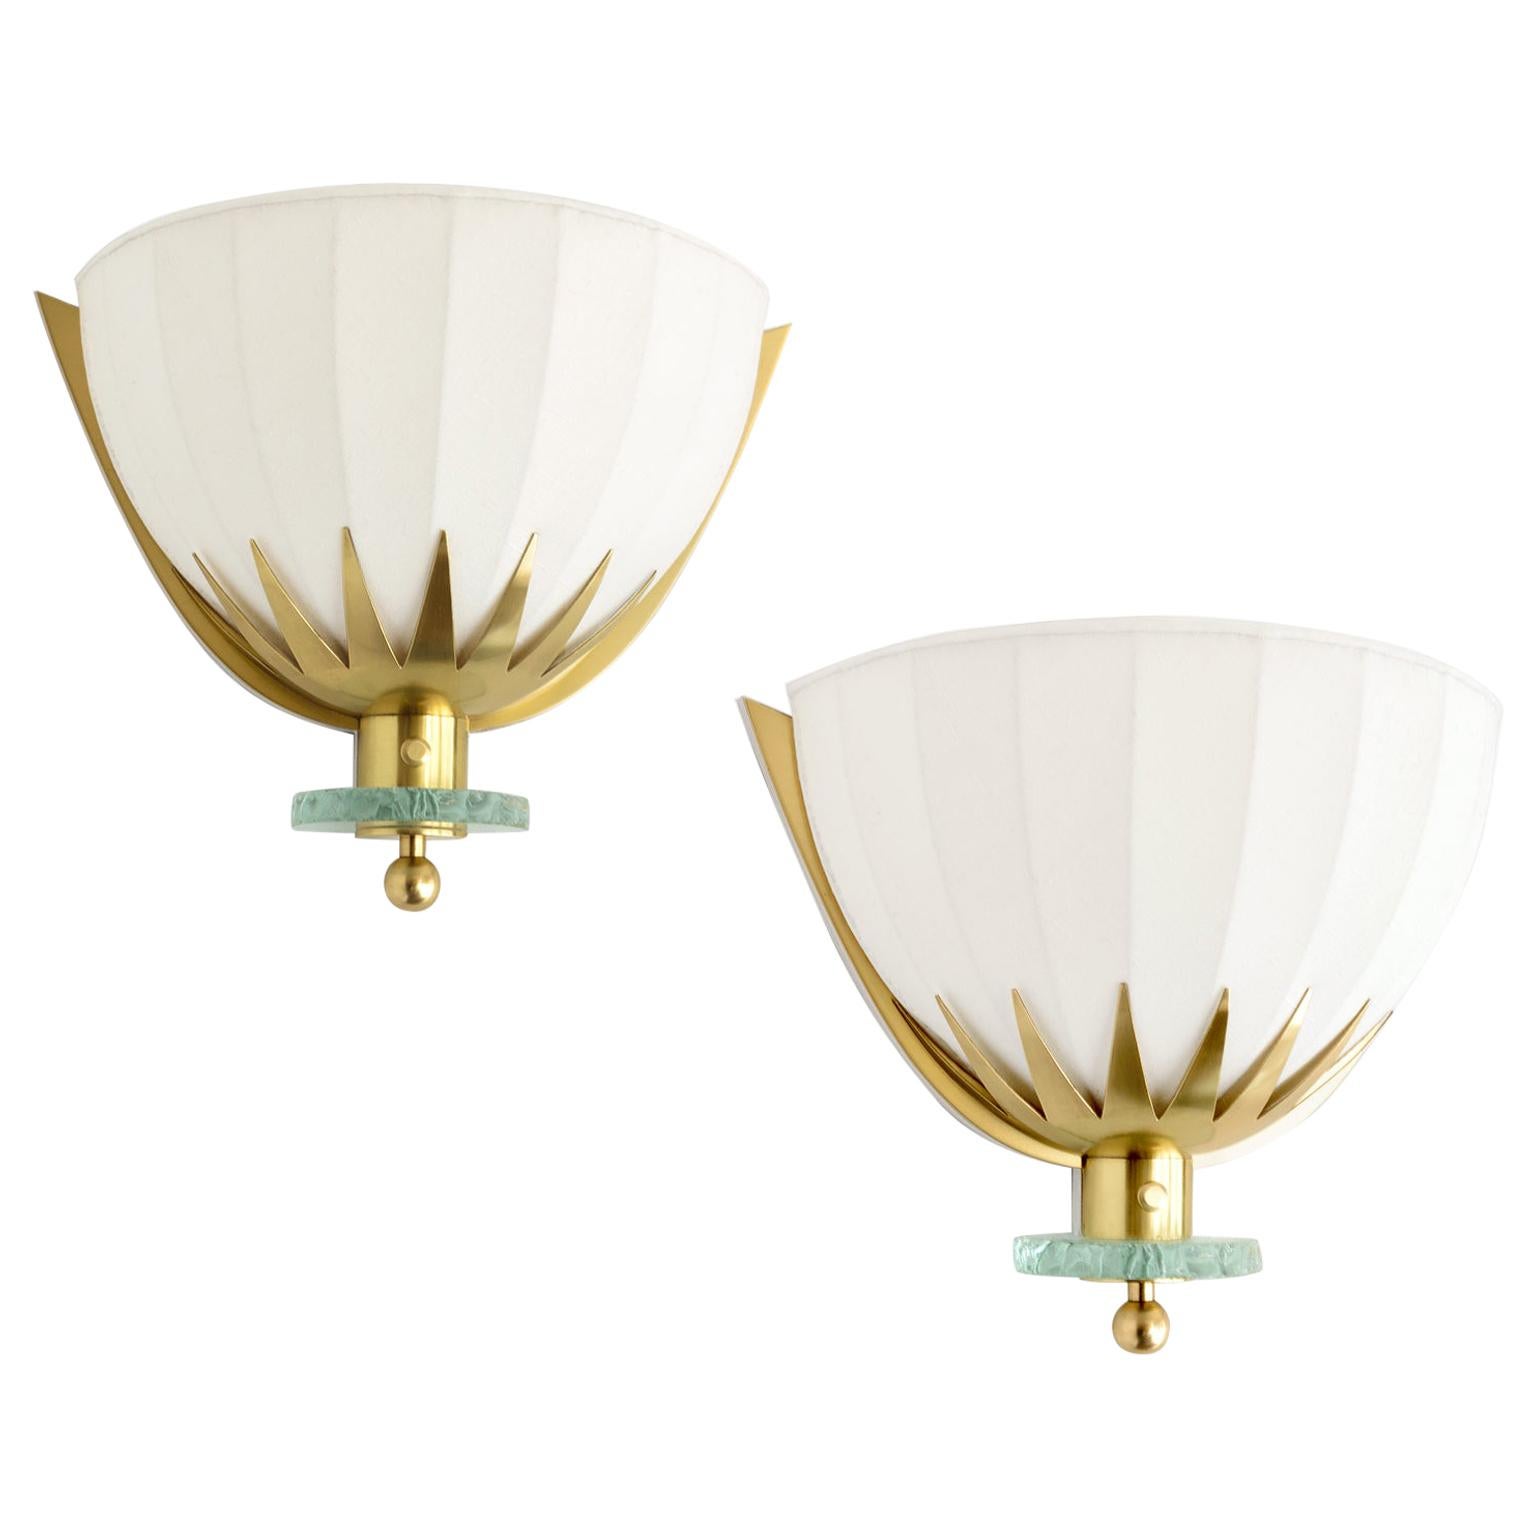 Swedish Art Deco, Scandinavian Modern Brass and Glass Sconces with Fabric Shades